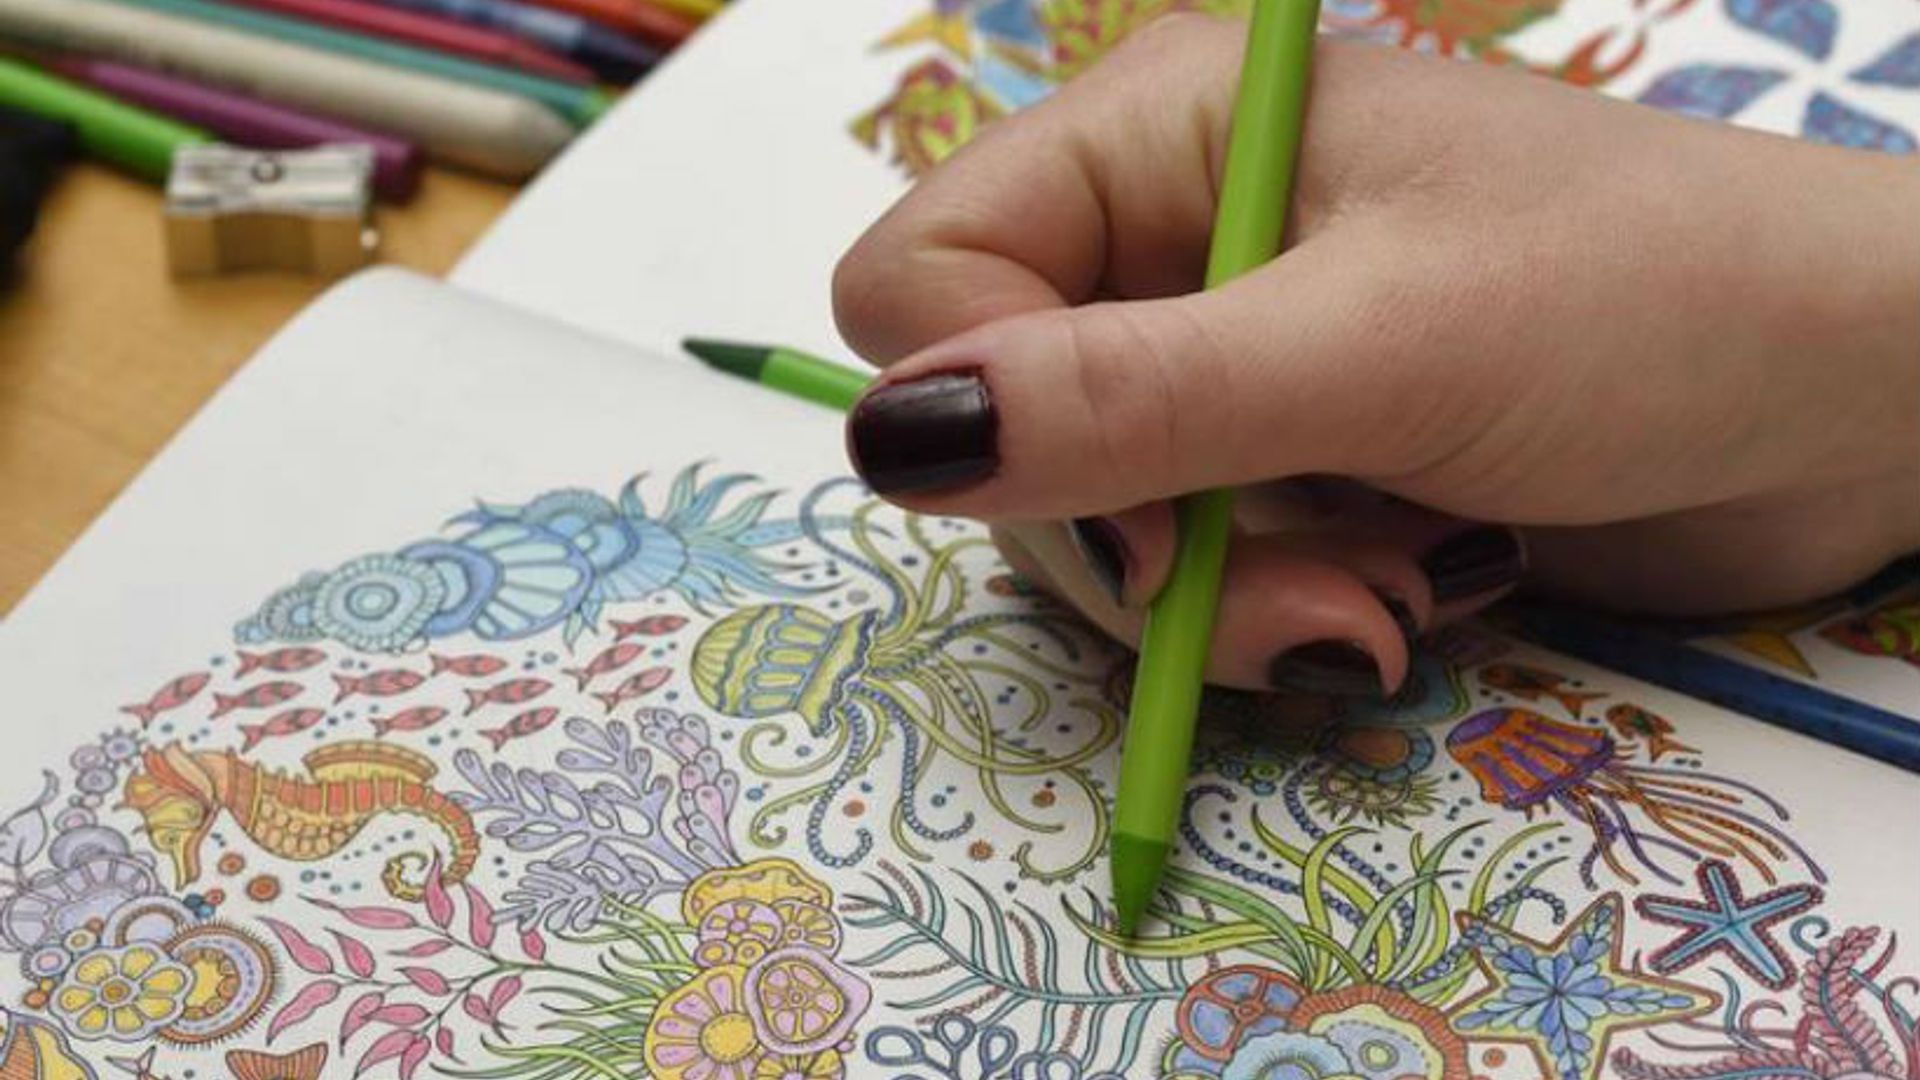 adult colouring in good mental health